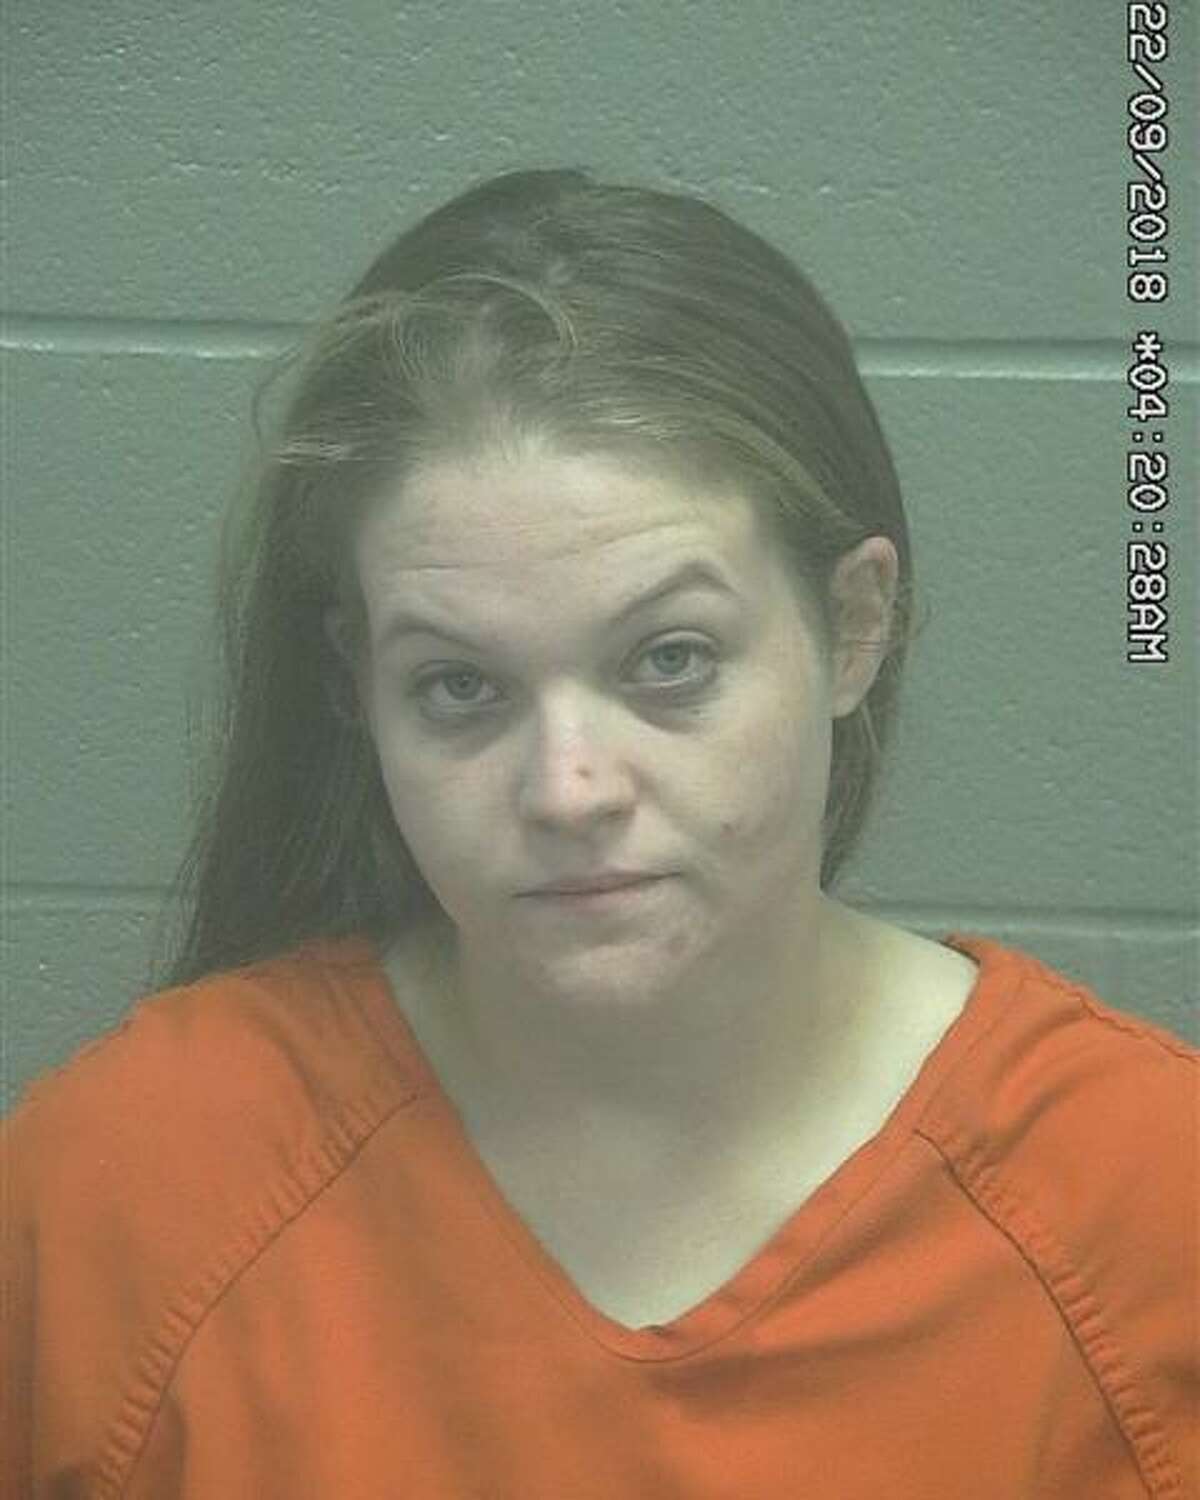 Marissa Kay Smith, 28, was arrested Sept. 21 after she allegedly fired a rifle near a man, according to court documents.